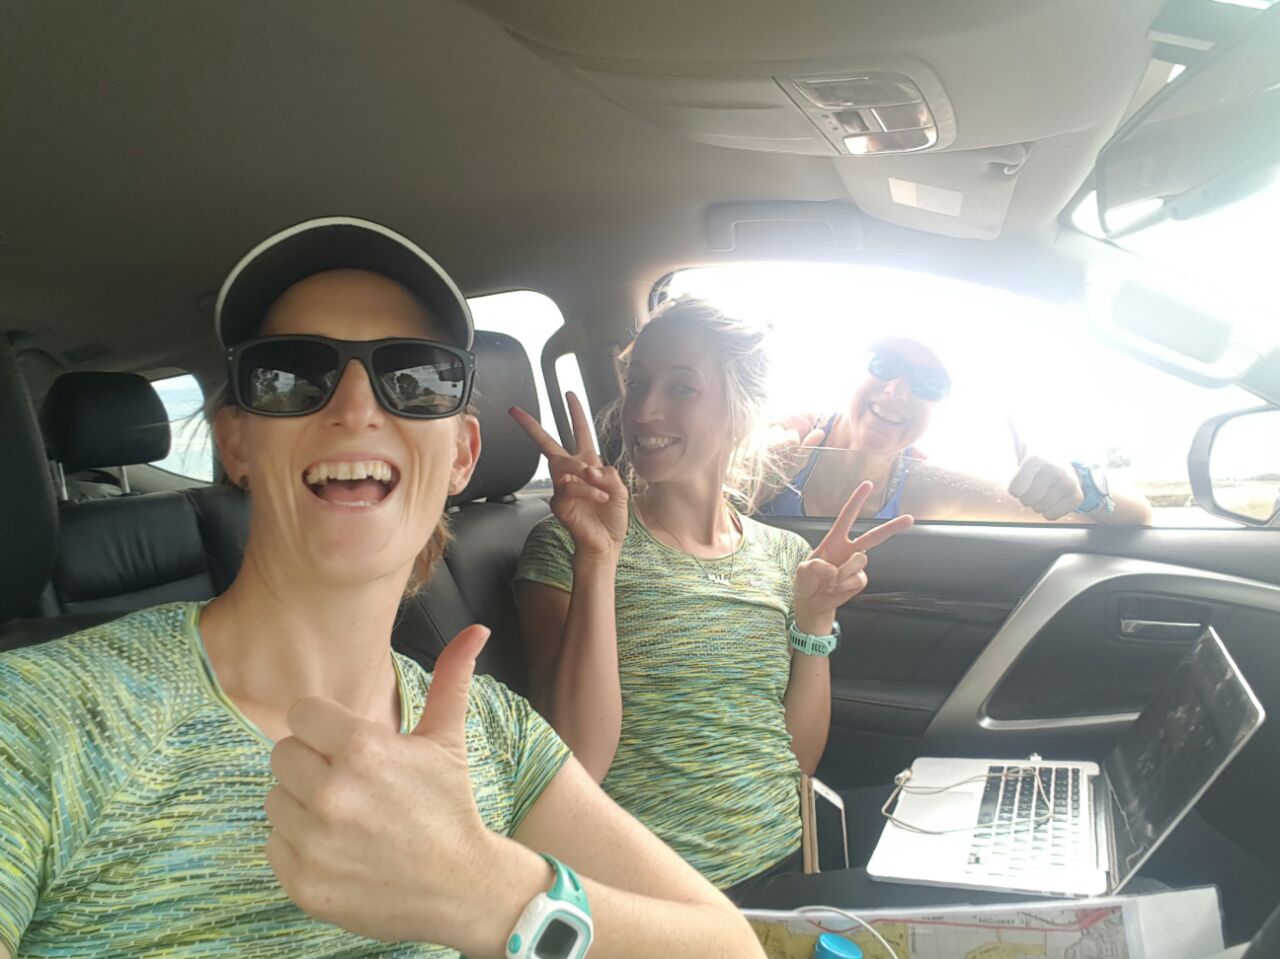 Working in the support car, in Australia.